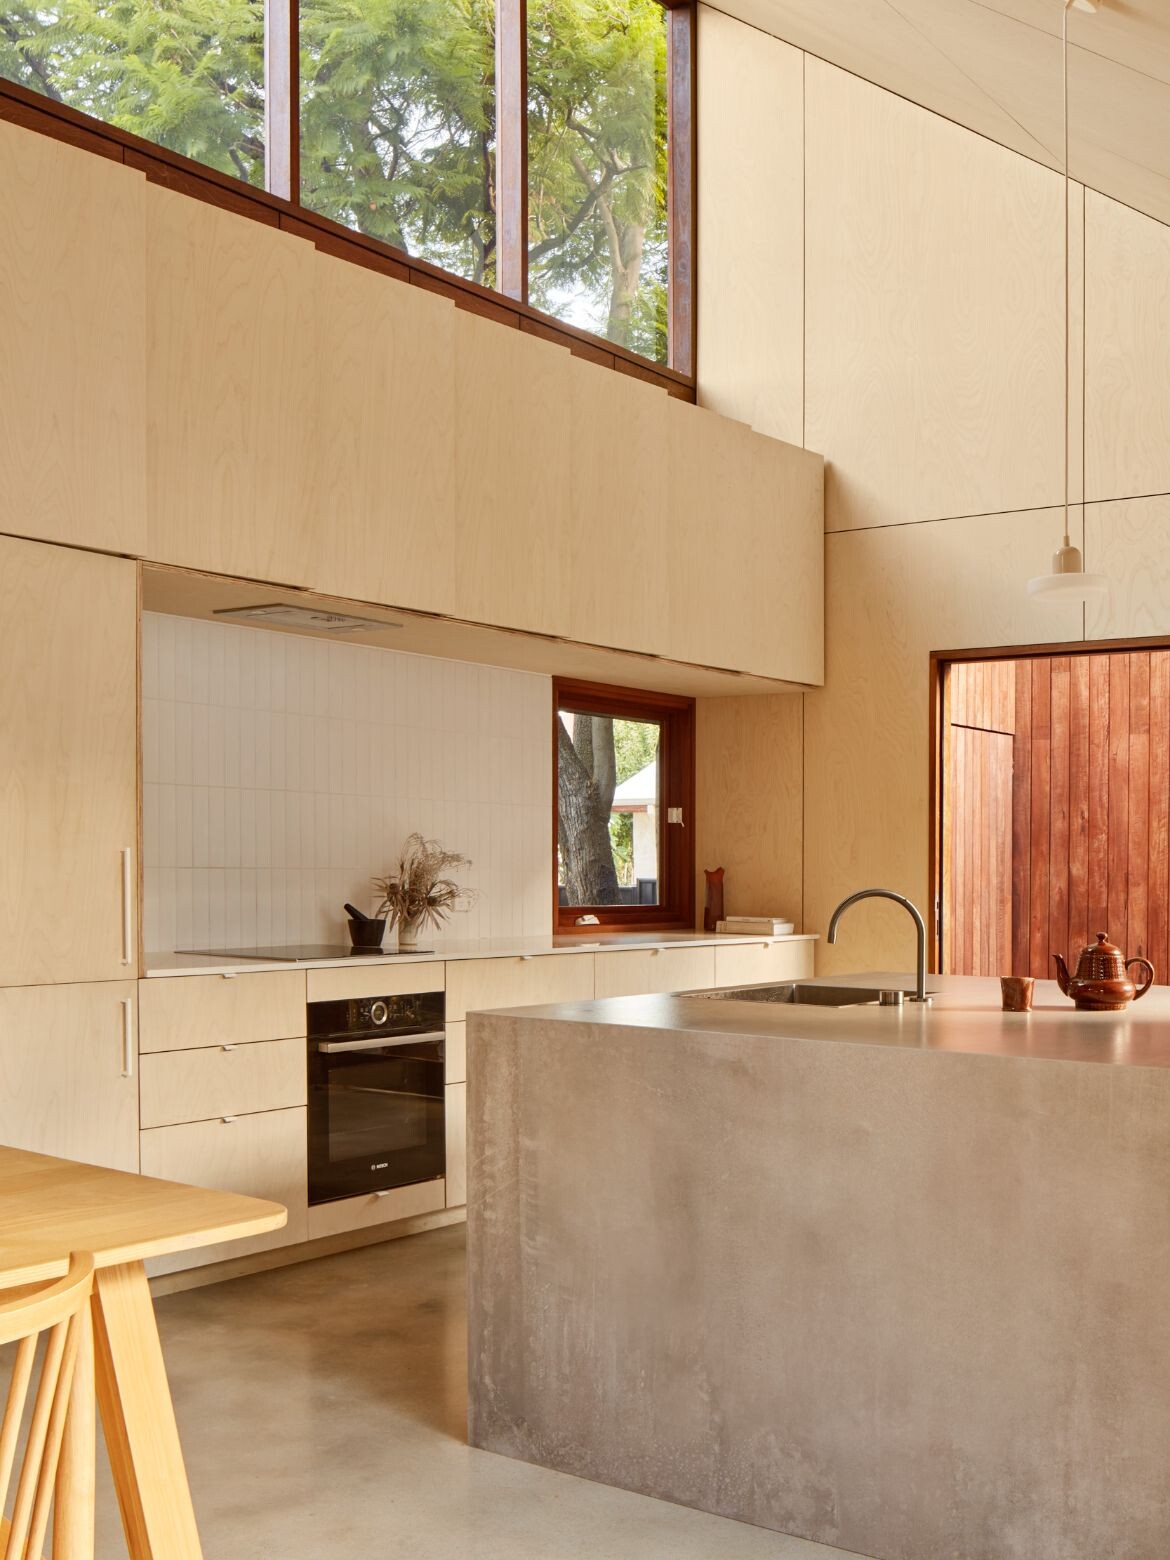 A very light kitchen with white-washed plywood